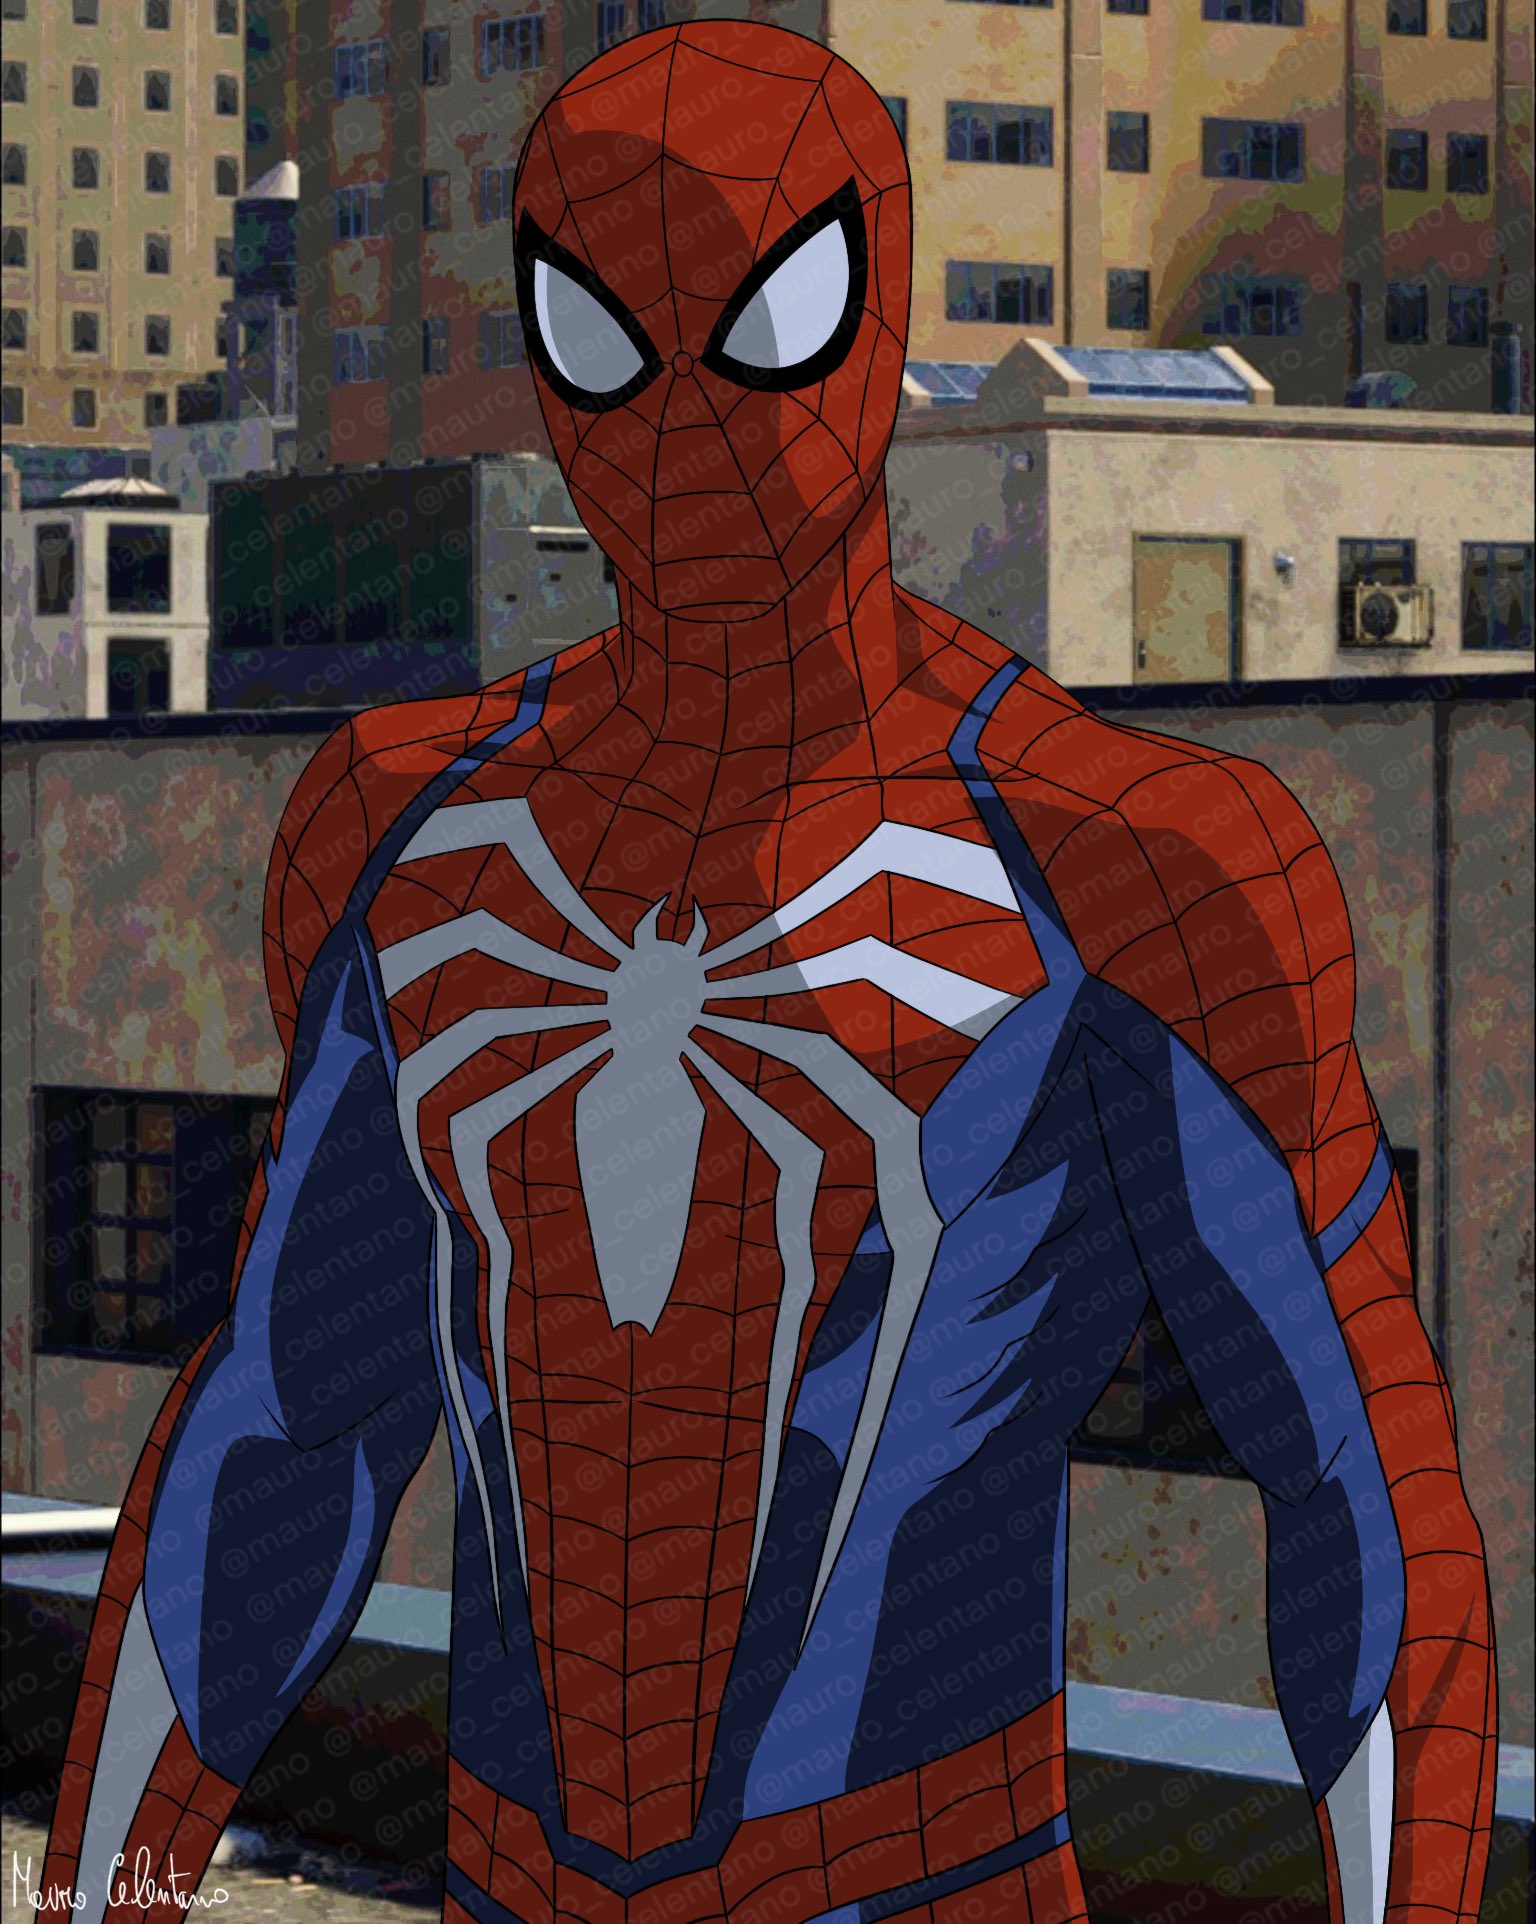 Planlagt smag Reception Mauro Celentano (comms closed) on Twitter: "Finished! Advanced Ultimate  Spider-Man #spidermanps4 #ultimatespiderman https://t.co/X8CXCkJ0mi" /  Twitter